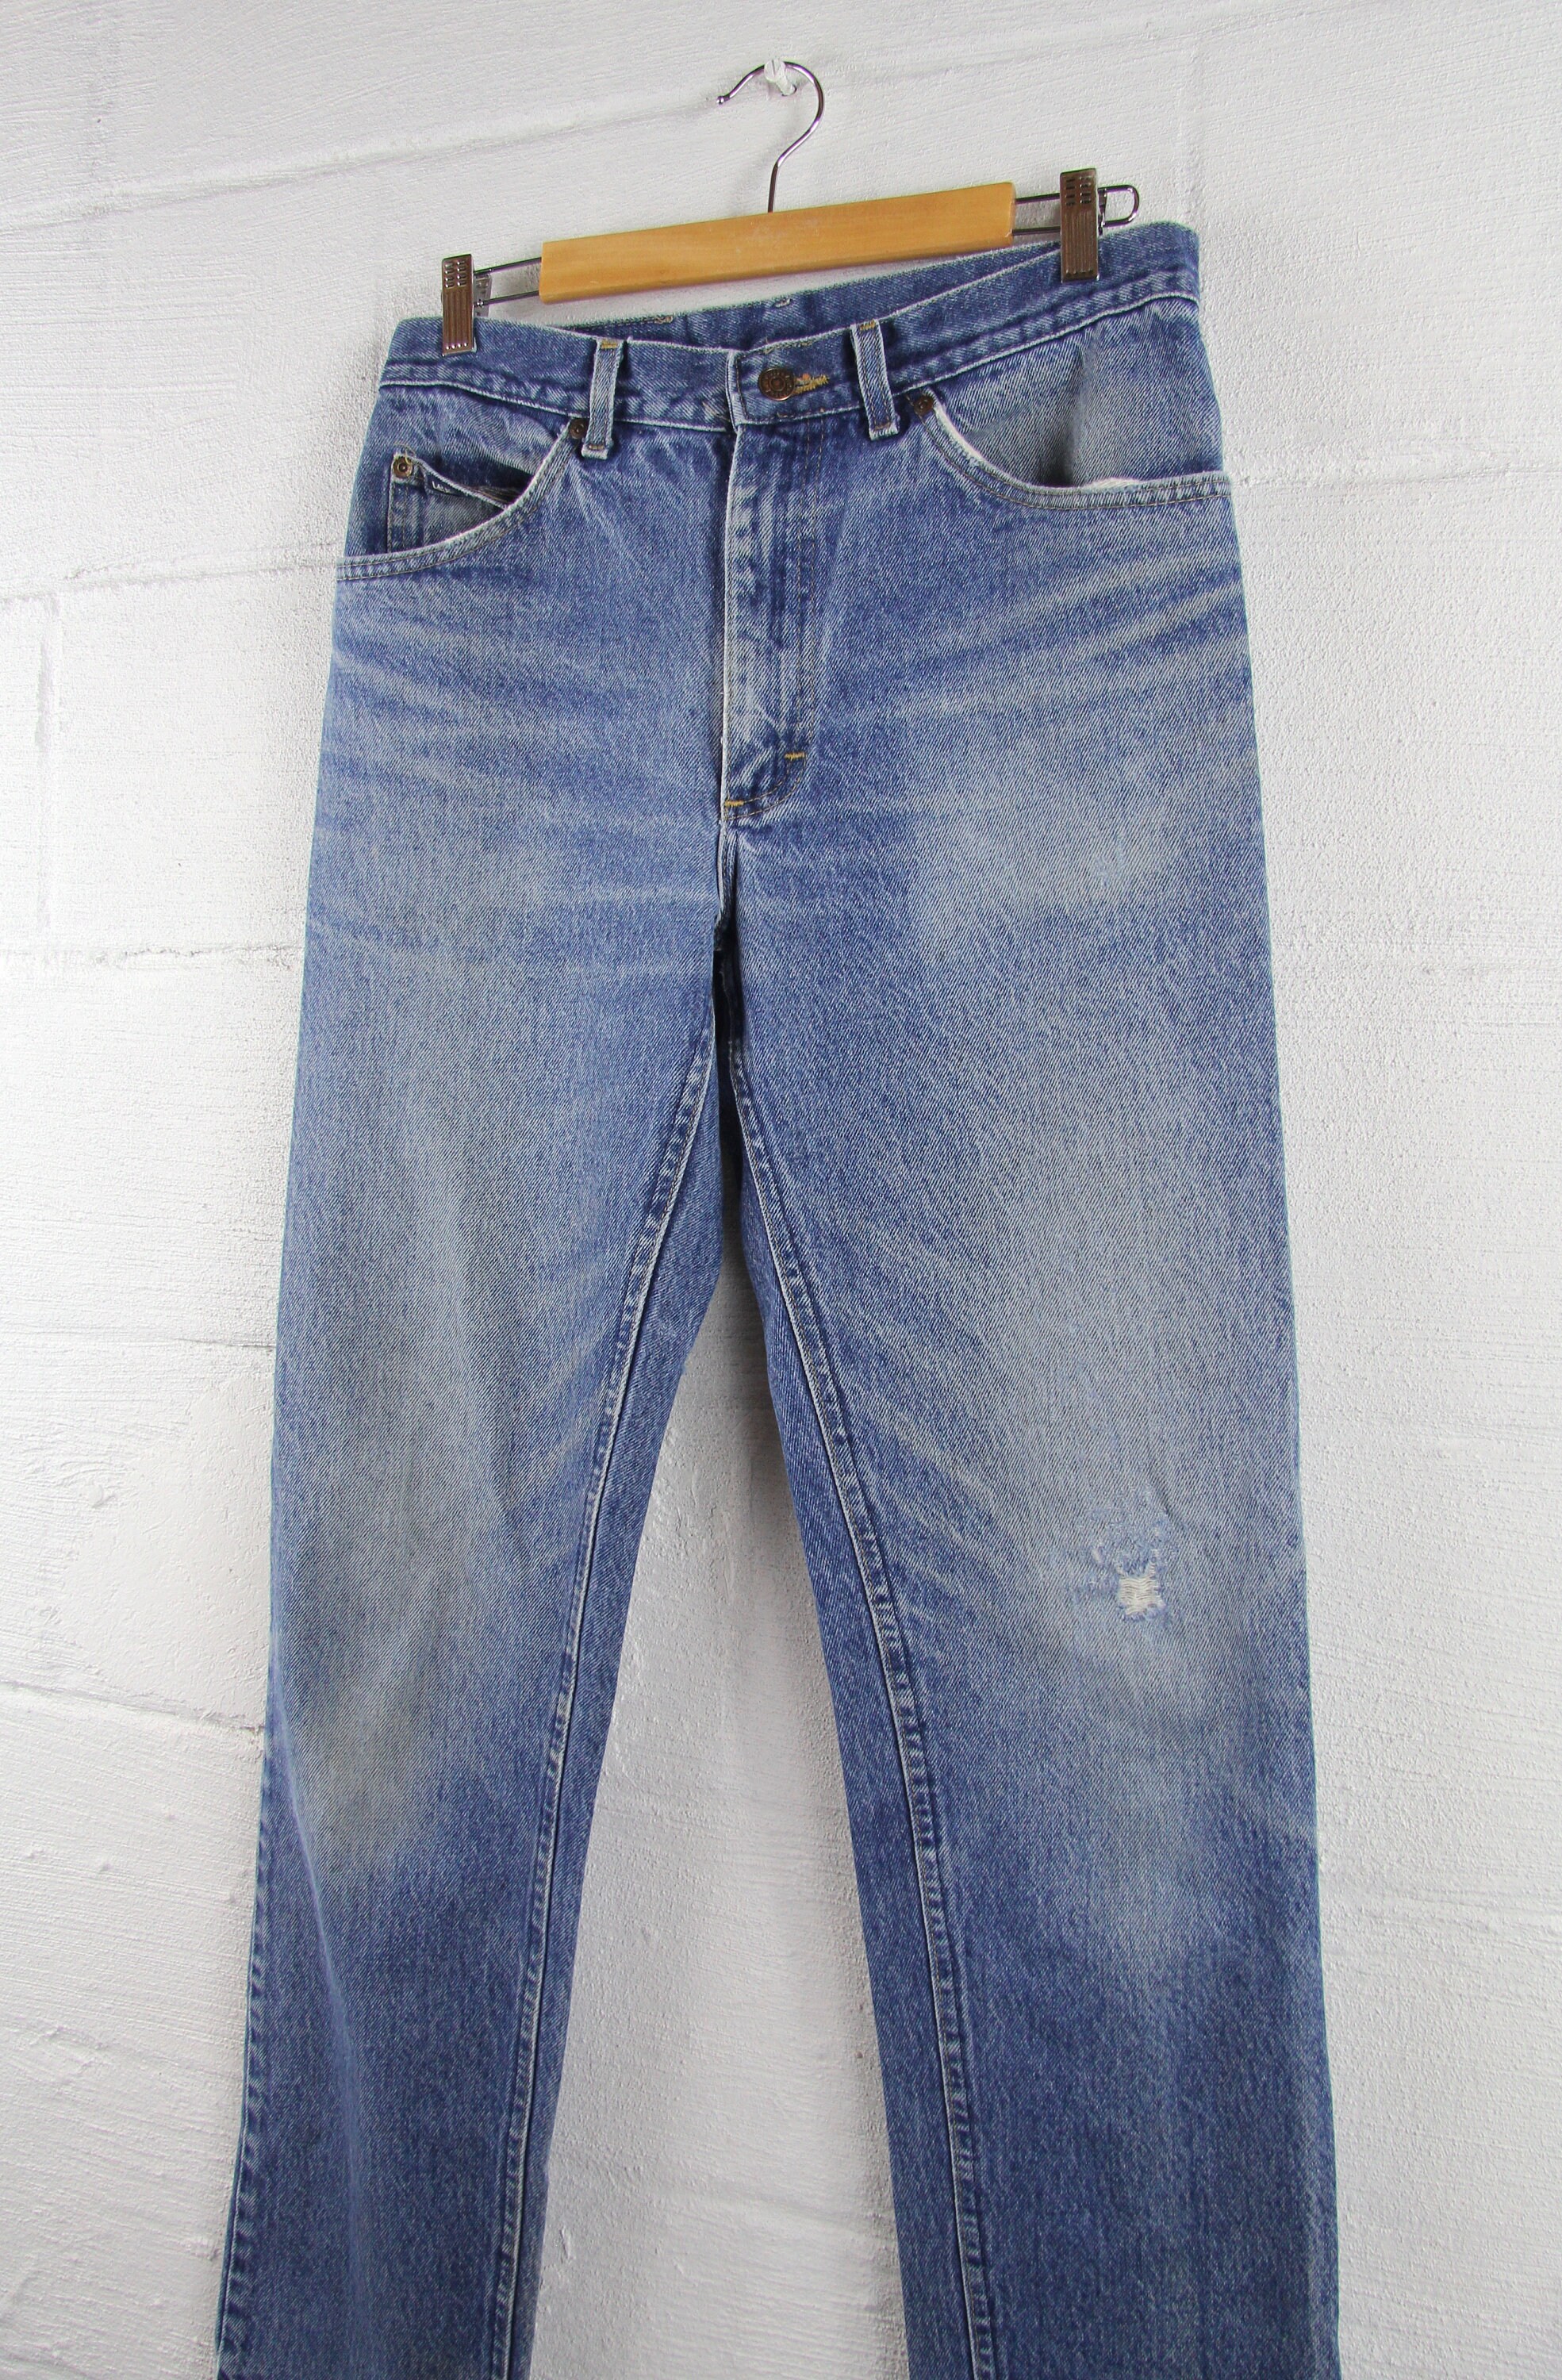 Lee 70s Vintage Jeans Light Wash Faded Distressed 31 x 33